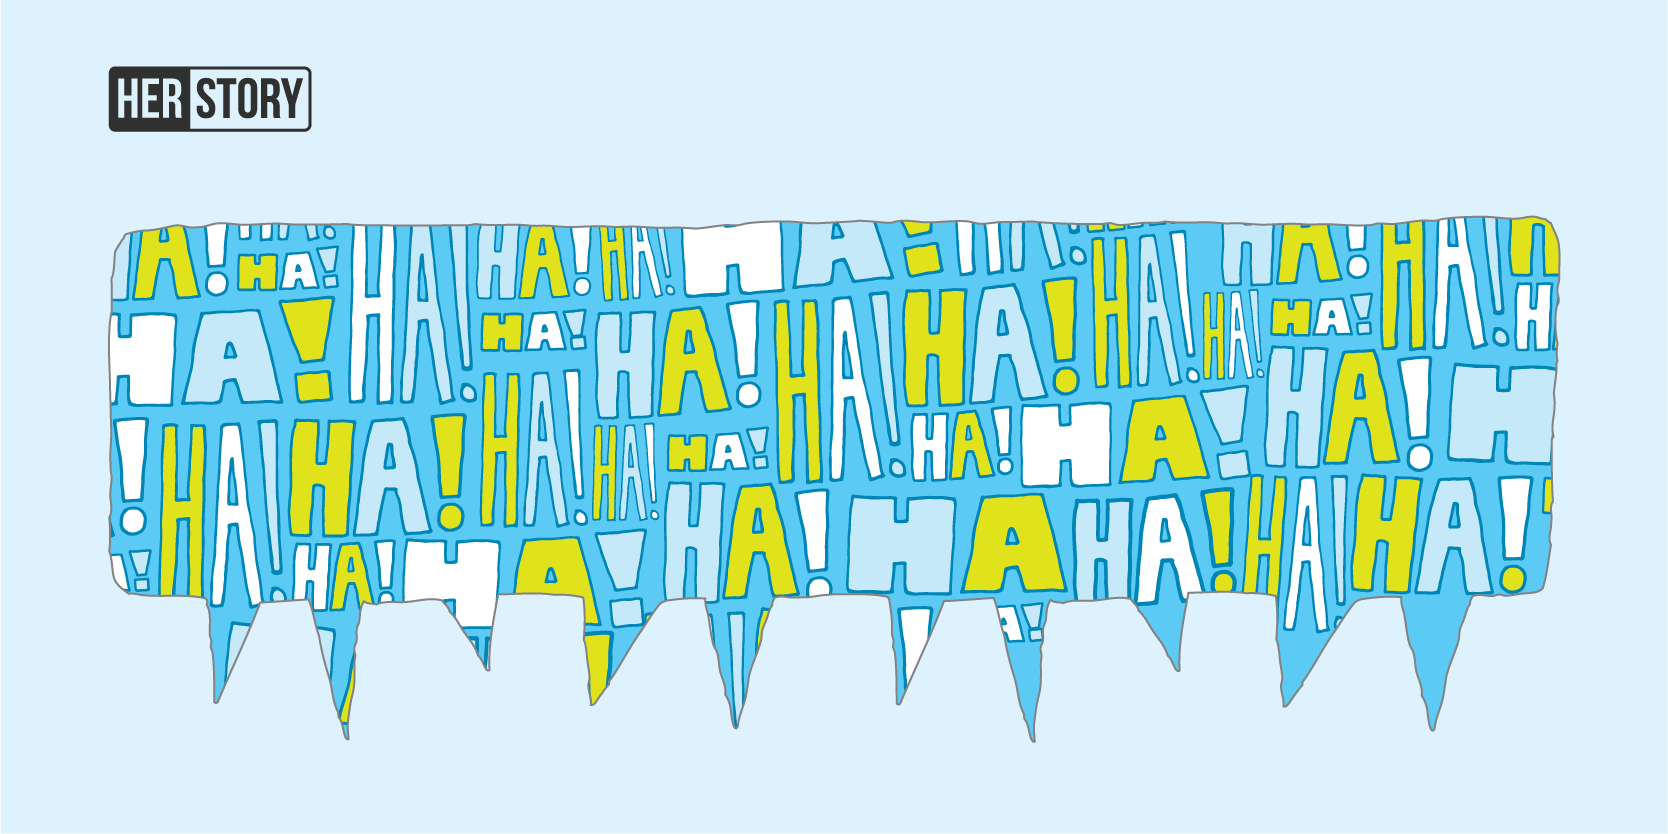 7 ways to find humour in life’s situations

